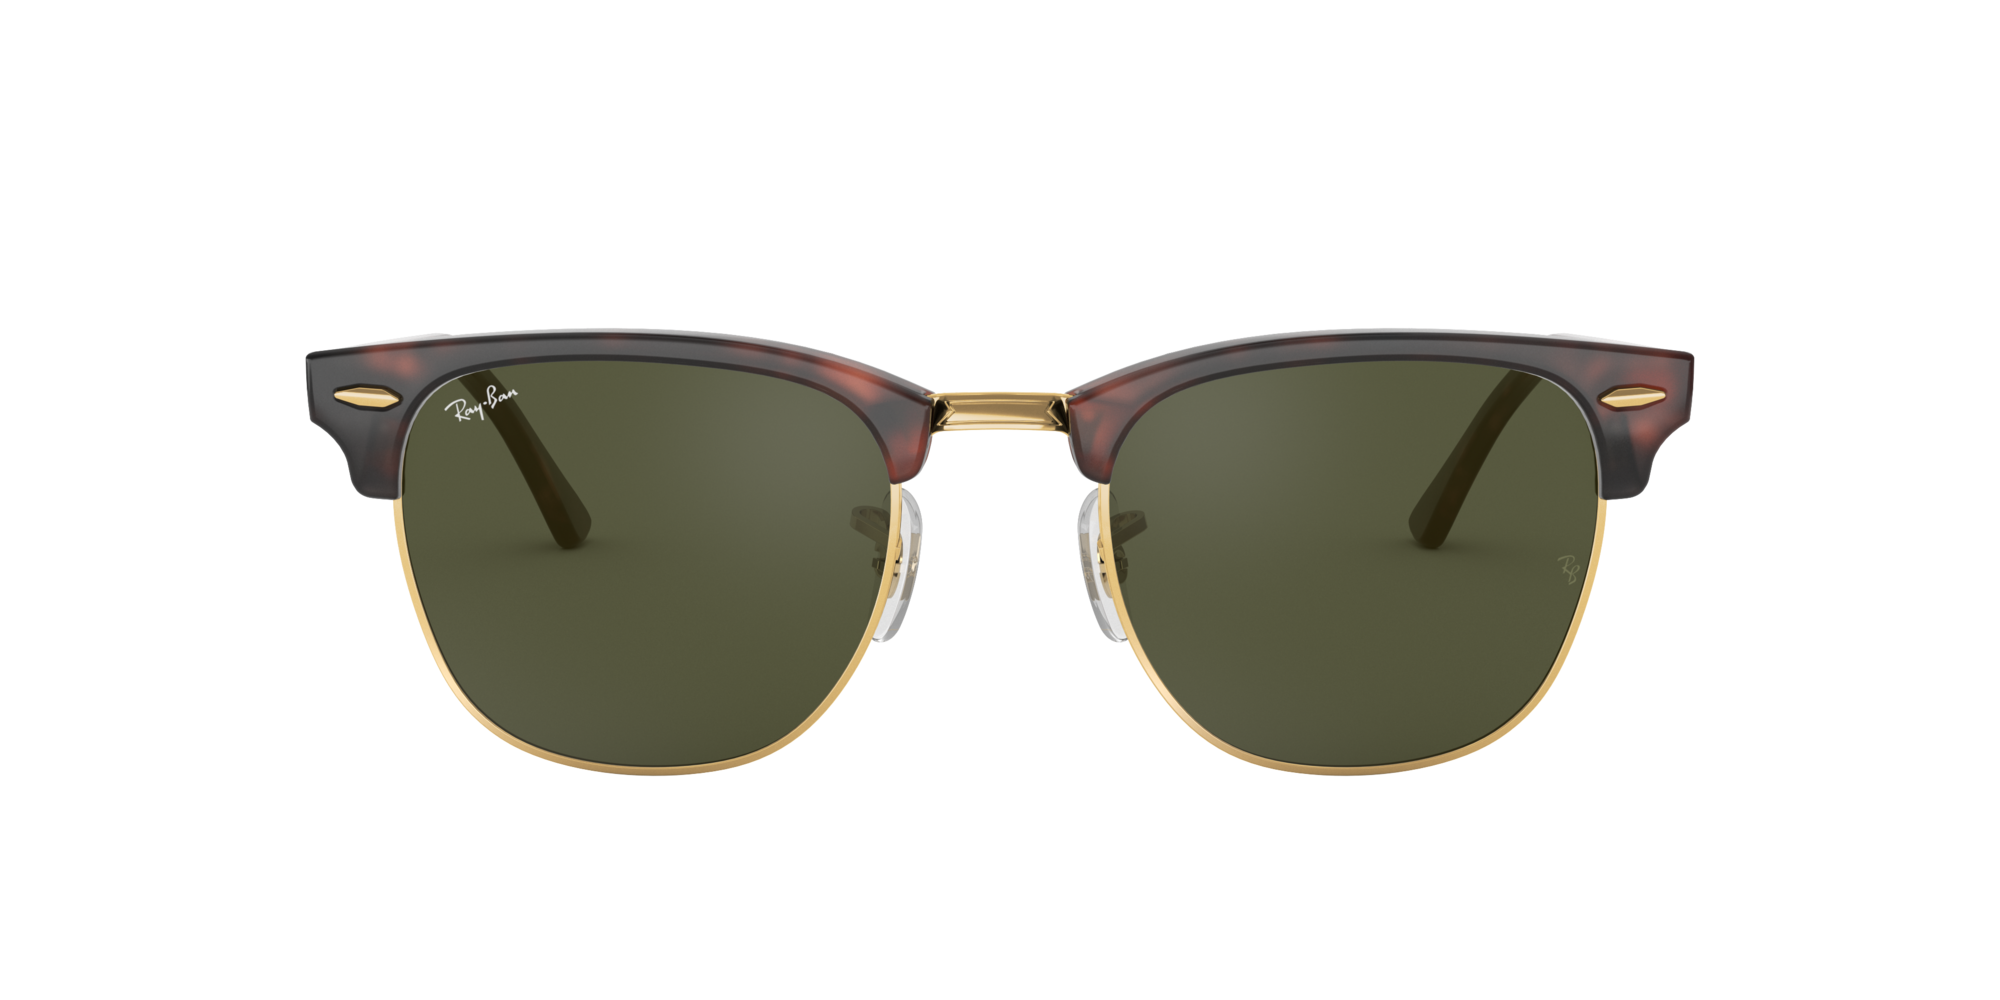 RB3016 49 CLUBMASTER: Shop Ray-Ban Tortoise Square Sunglasses at ...